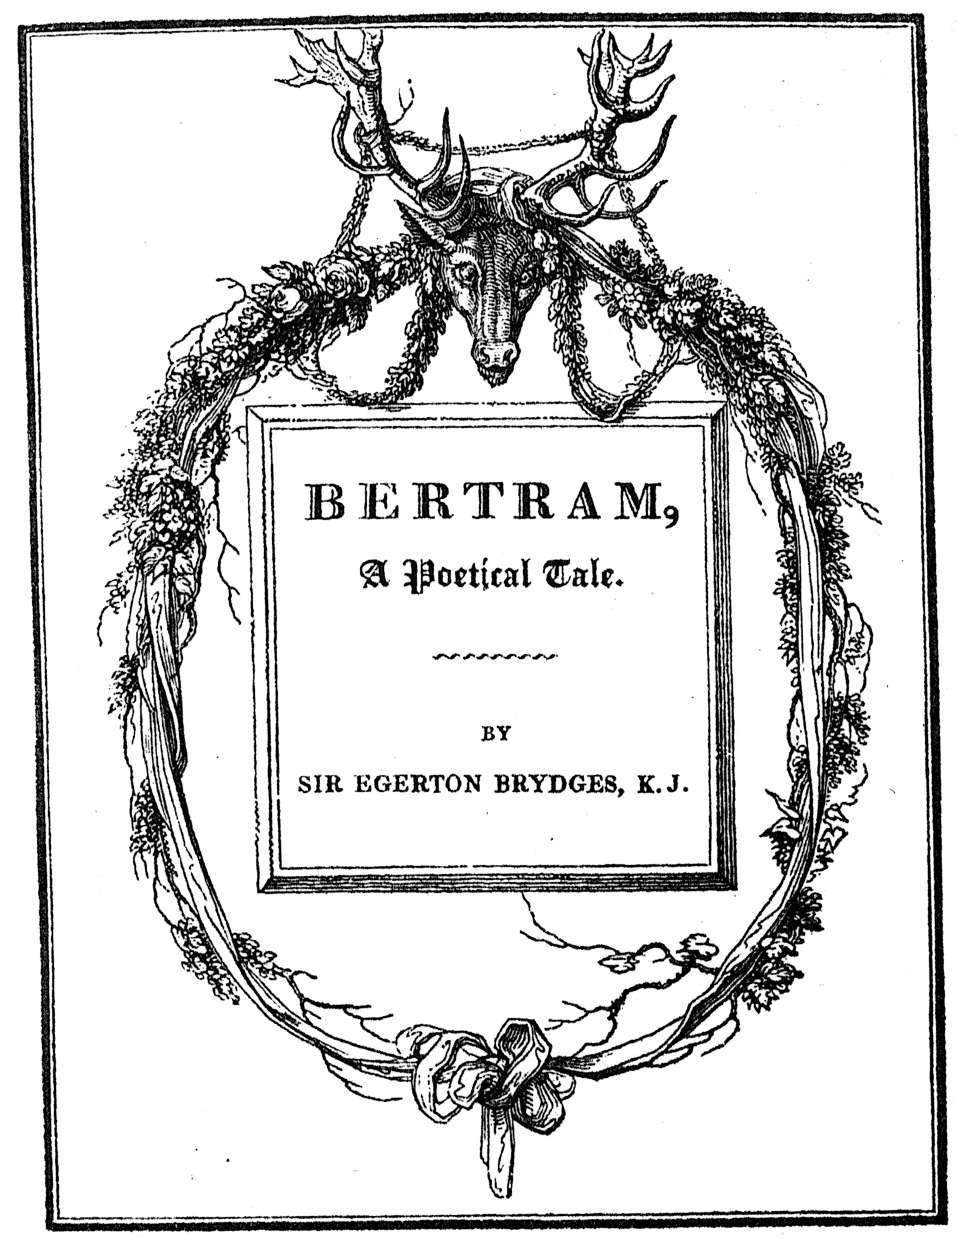 From Sir Egerton Brydges 'Bertram' 1814, frontispiece, published size of box area 7.7cm wide by 10.3cm high.